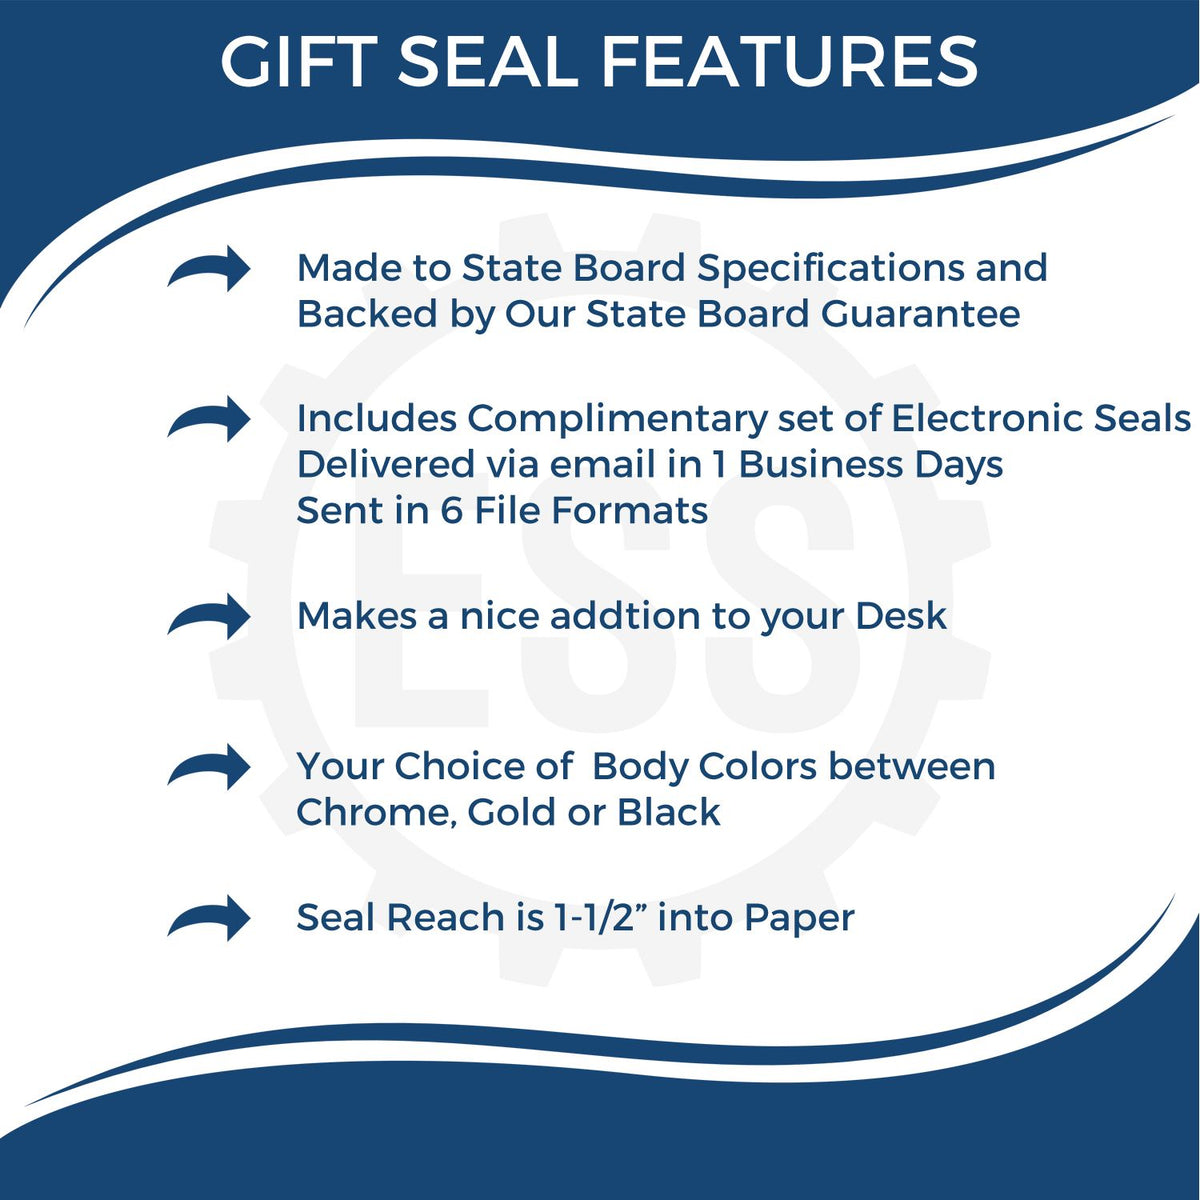 A picture of an infographic highlighting the selling points for the Gift New York Geologist Seal